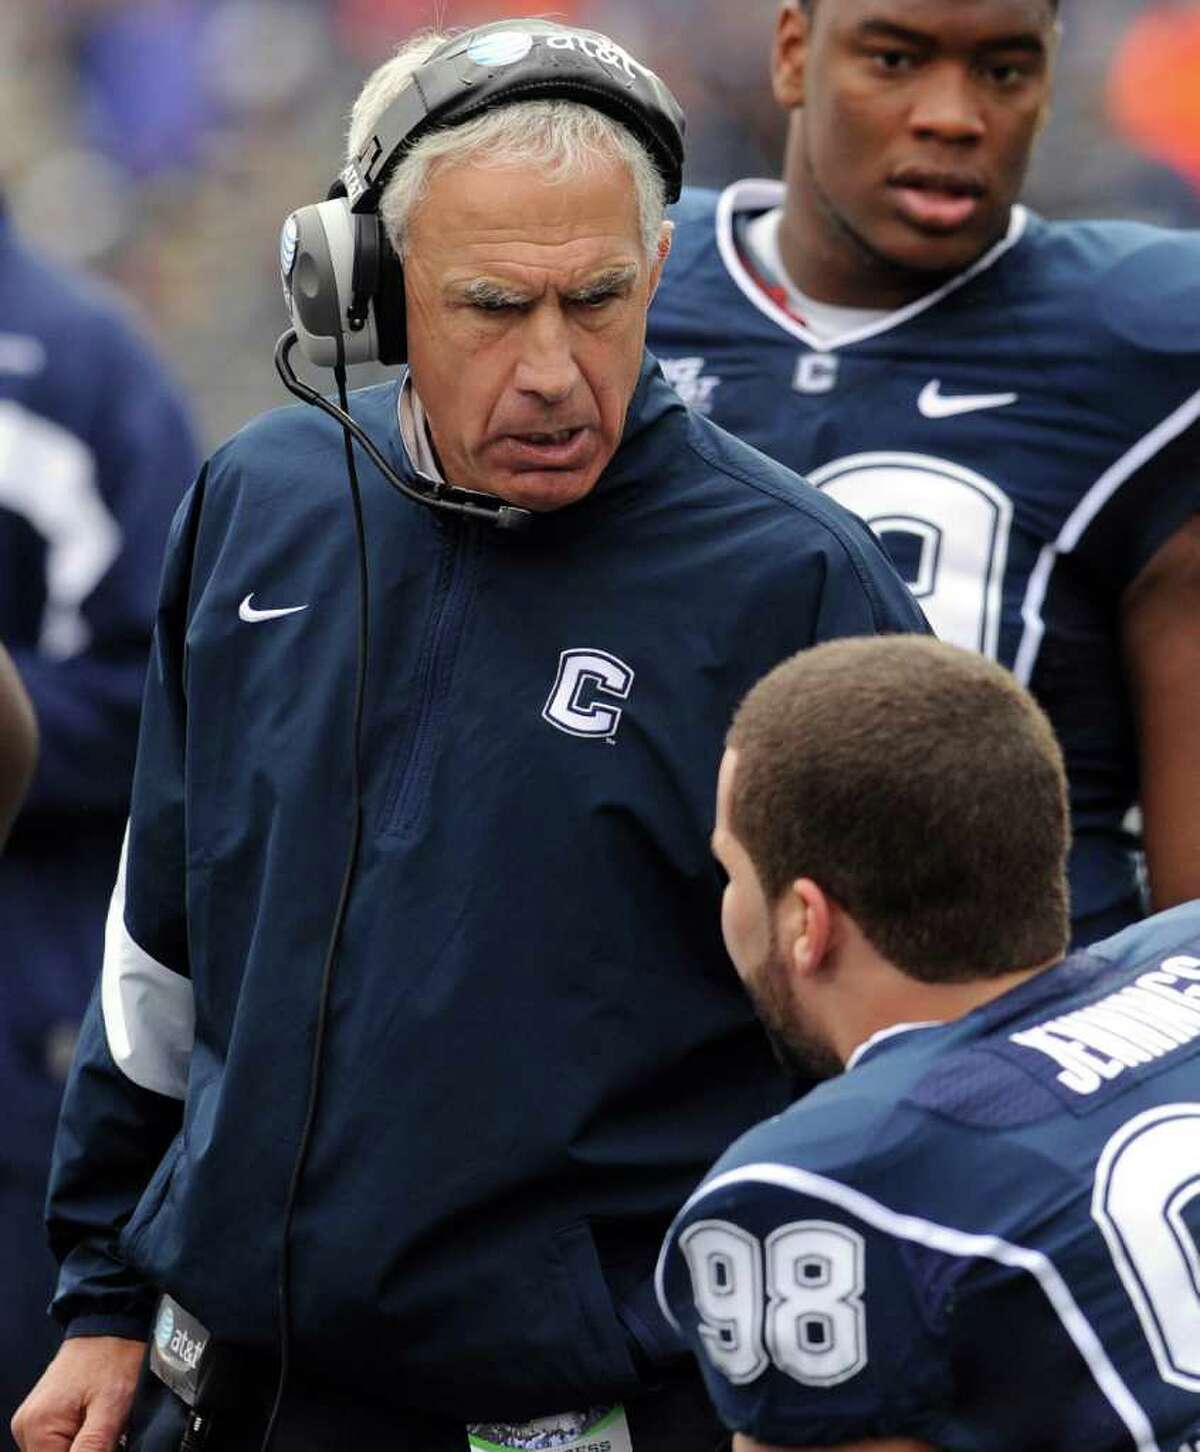 This Oct. 1, 2011 file photo shows Connecticut coach Paul Pasqualoni speaking with Ted Jennings (98) in the first quarter of an NCAA college football game against Western Michigan, in East Hartford, Conn. Pasqualoni says he tries to ignore the building chatter that he could be a one year-and done head coach at Connecticut unless the Huskies' season takes a dramatic turn for the better. (AP Photo/Jessica Hill, File)